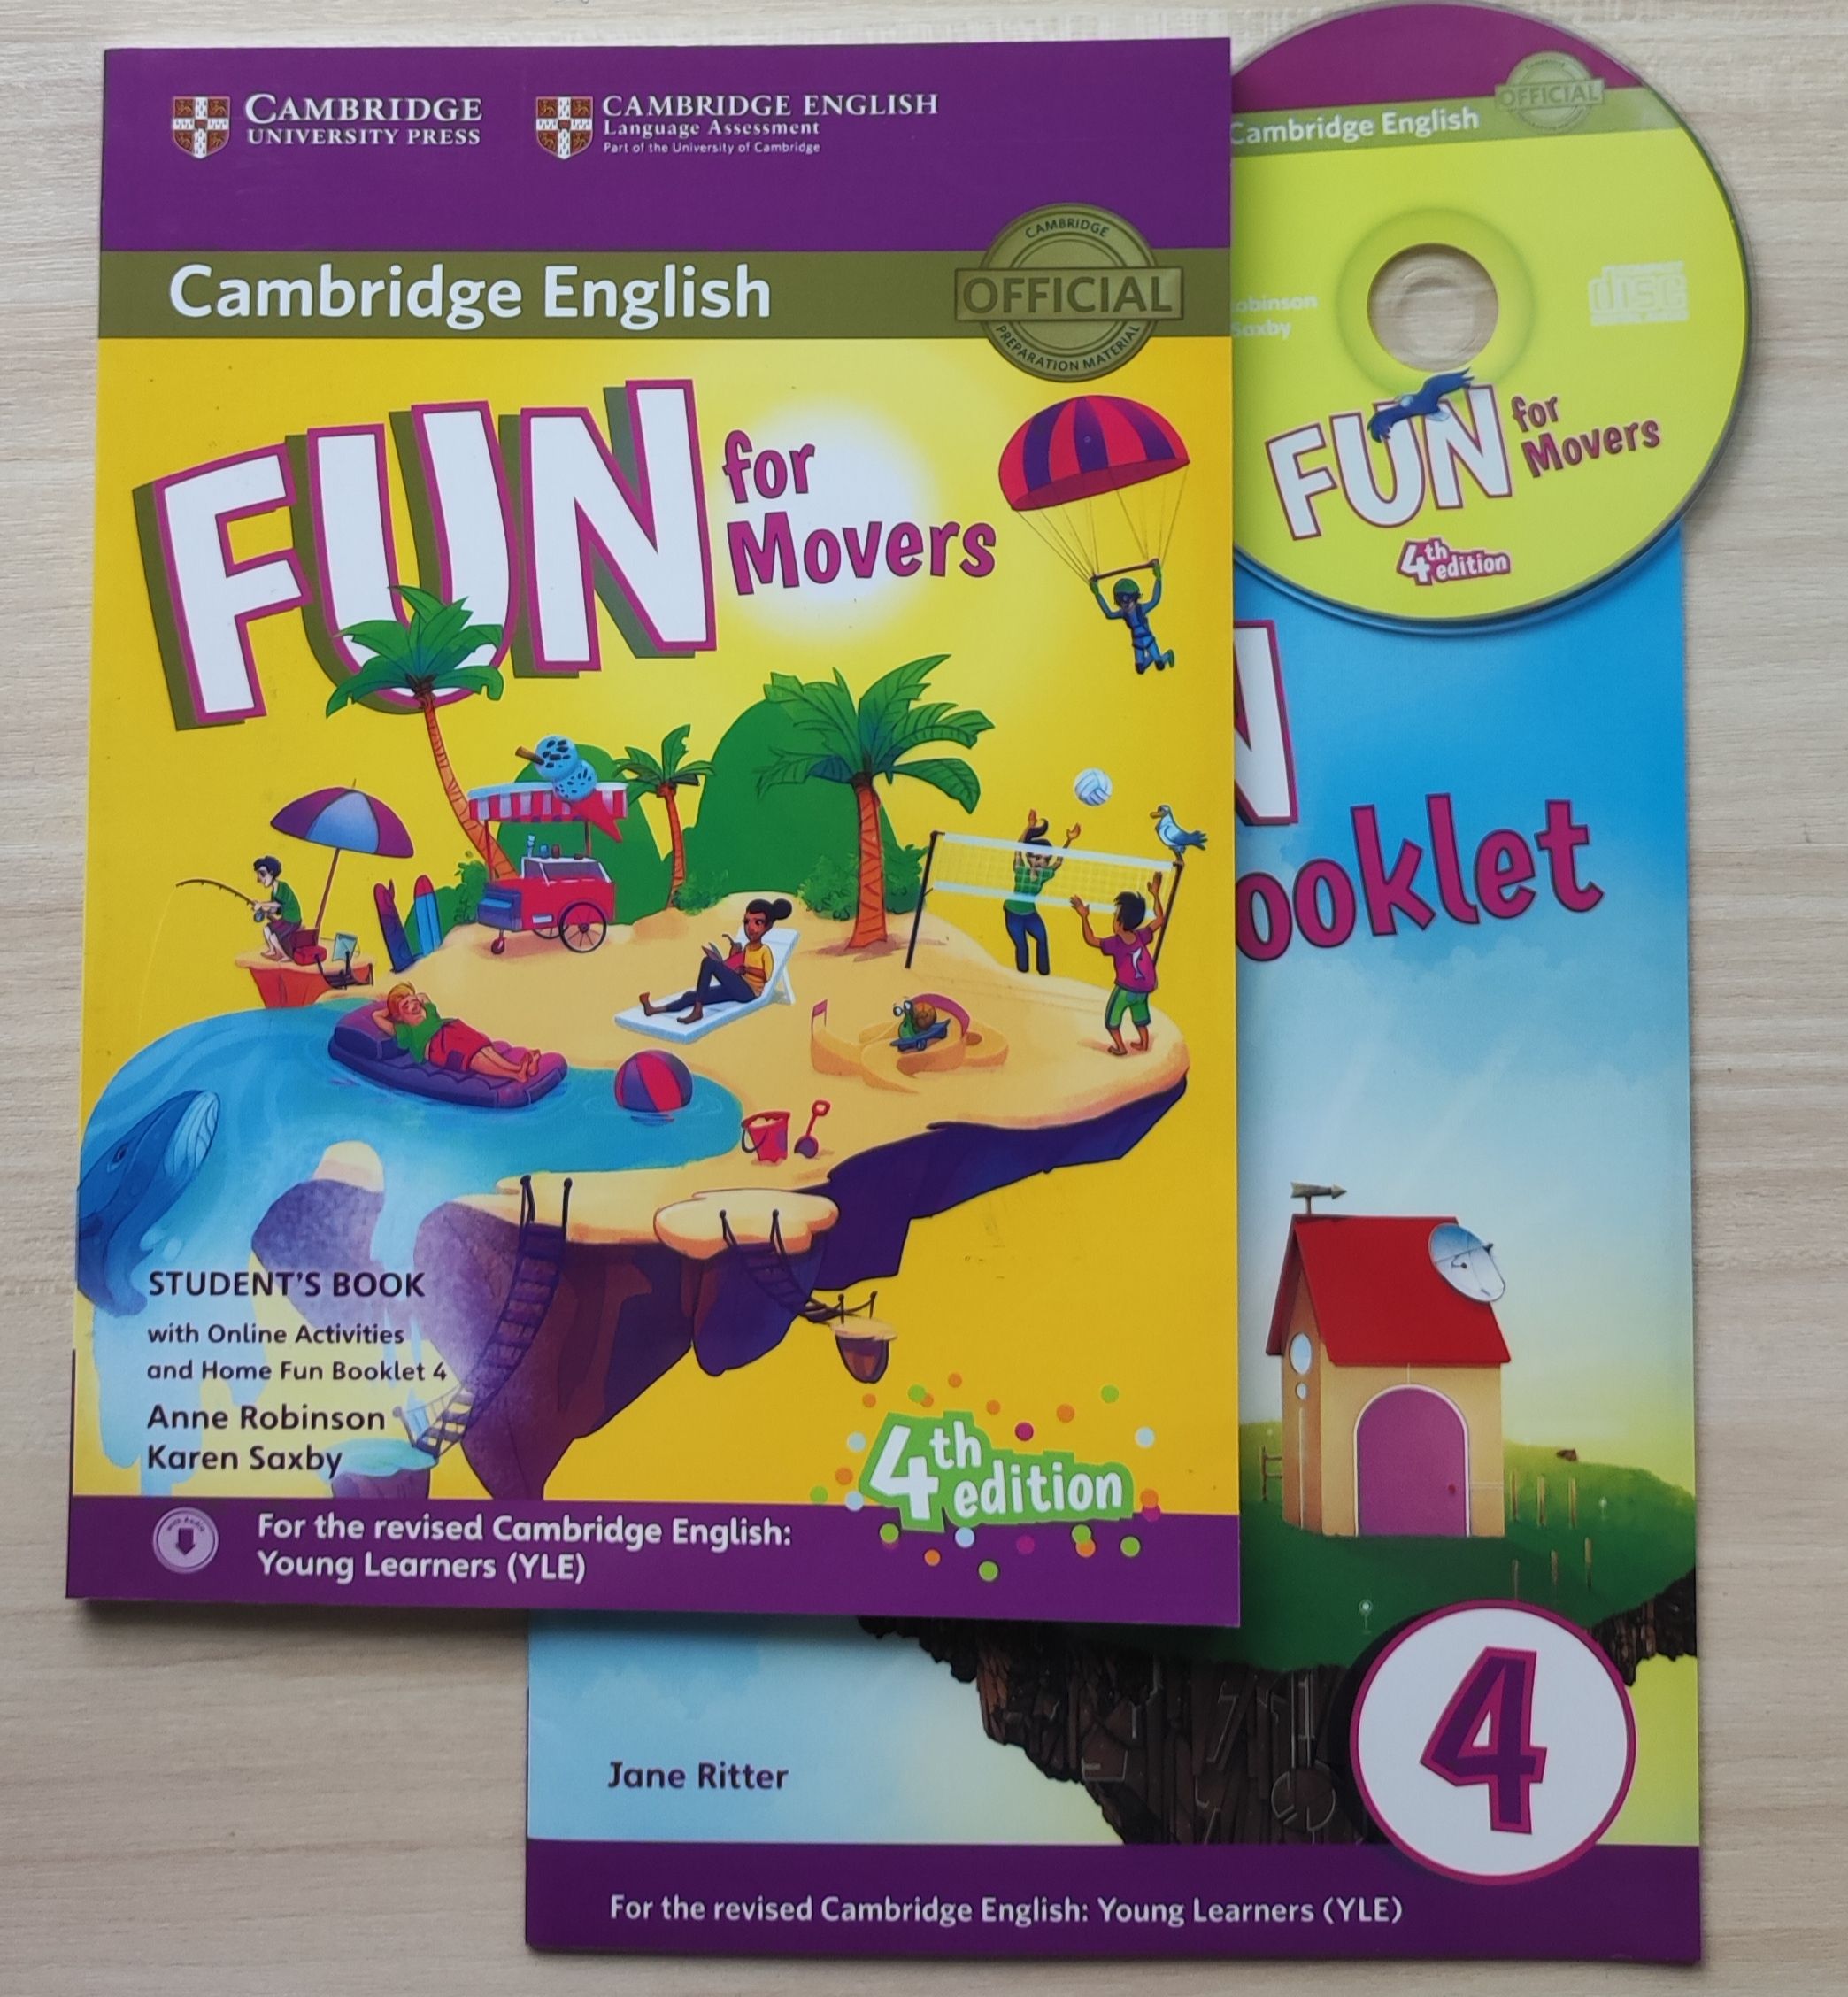 Home fun booklet. Fun for Movers. Fun for Movers мл. Home fun booklet 2. Cambridge fun for Movers.